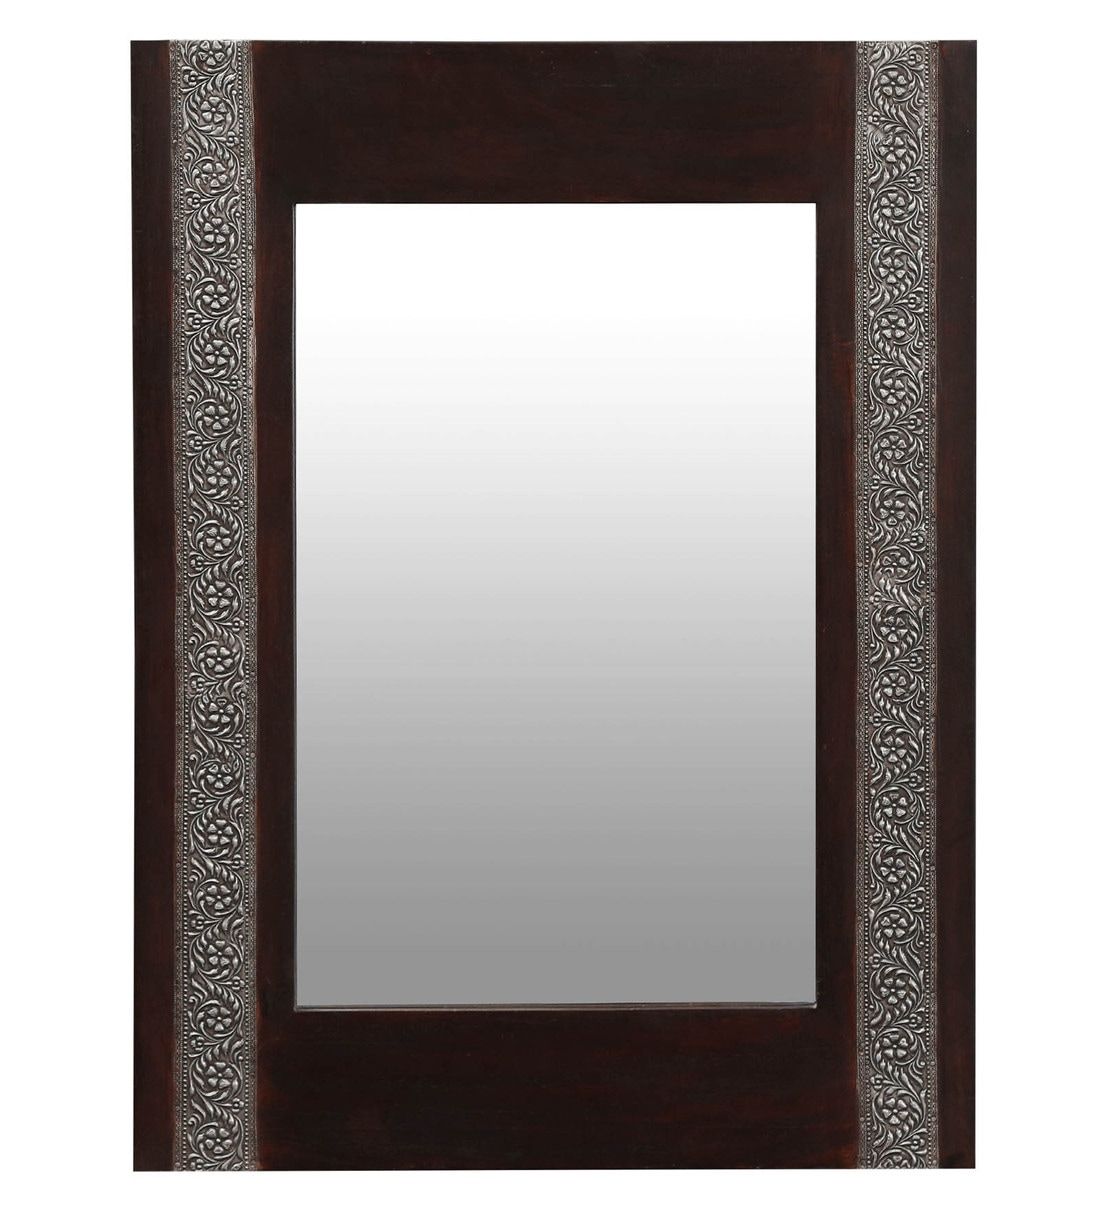 Buy Solid Wood Round Wall Mirror In Brown Colouronline – Wall Within Medium Brown Wood Wall Mirrors (View 15 of 15)